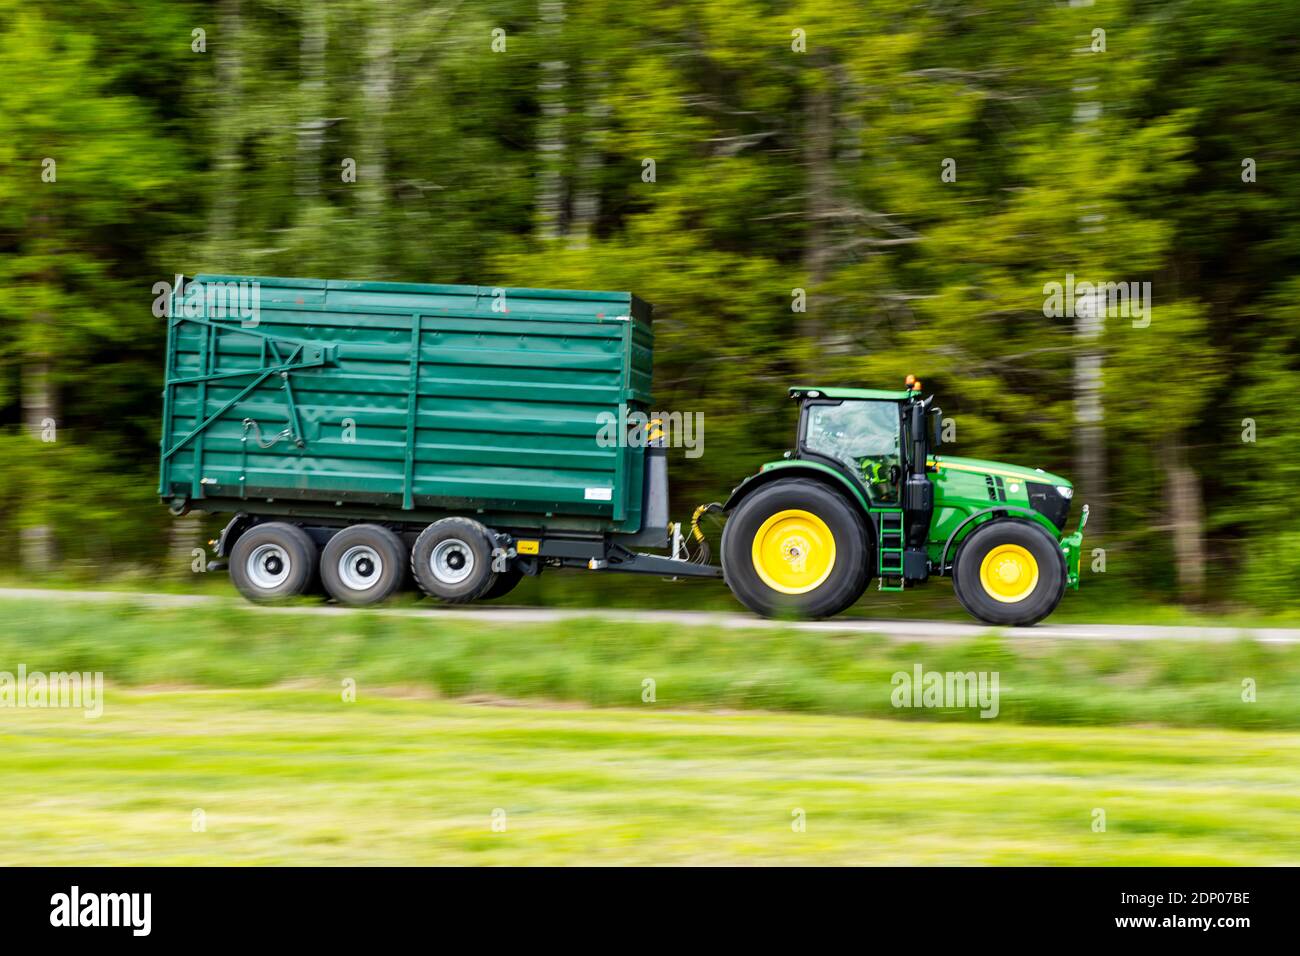 Tractor with trailer on move Stock Photo